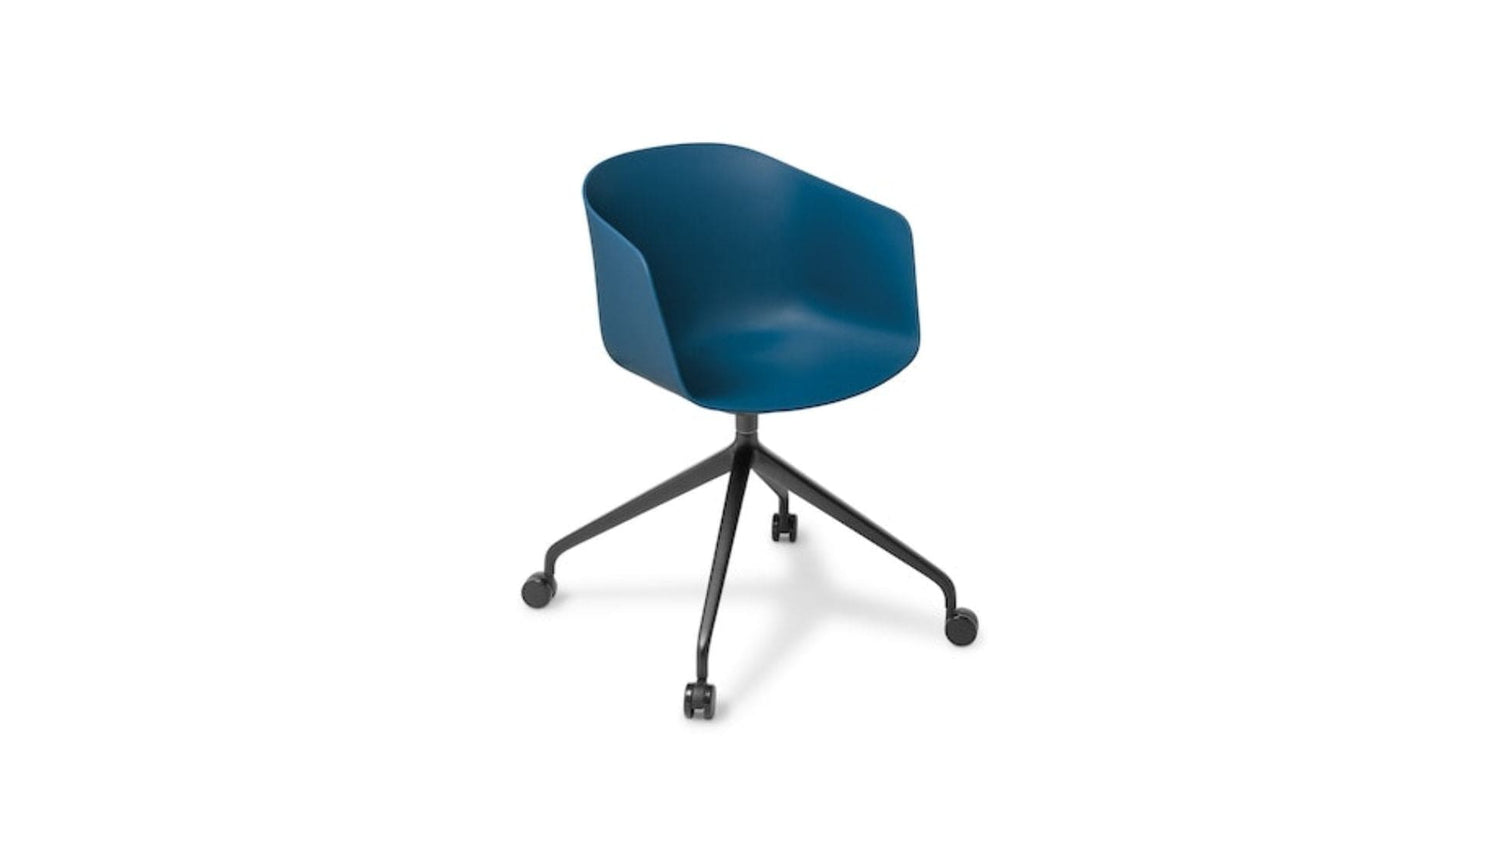 Seating Standard Seat / 4 Star Black Powder coated Castor base / Classic Blue Max Tub Chair